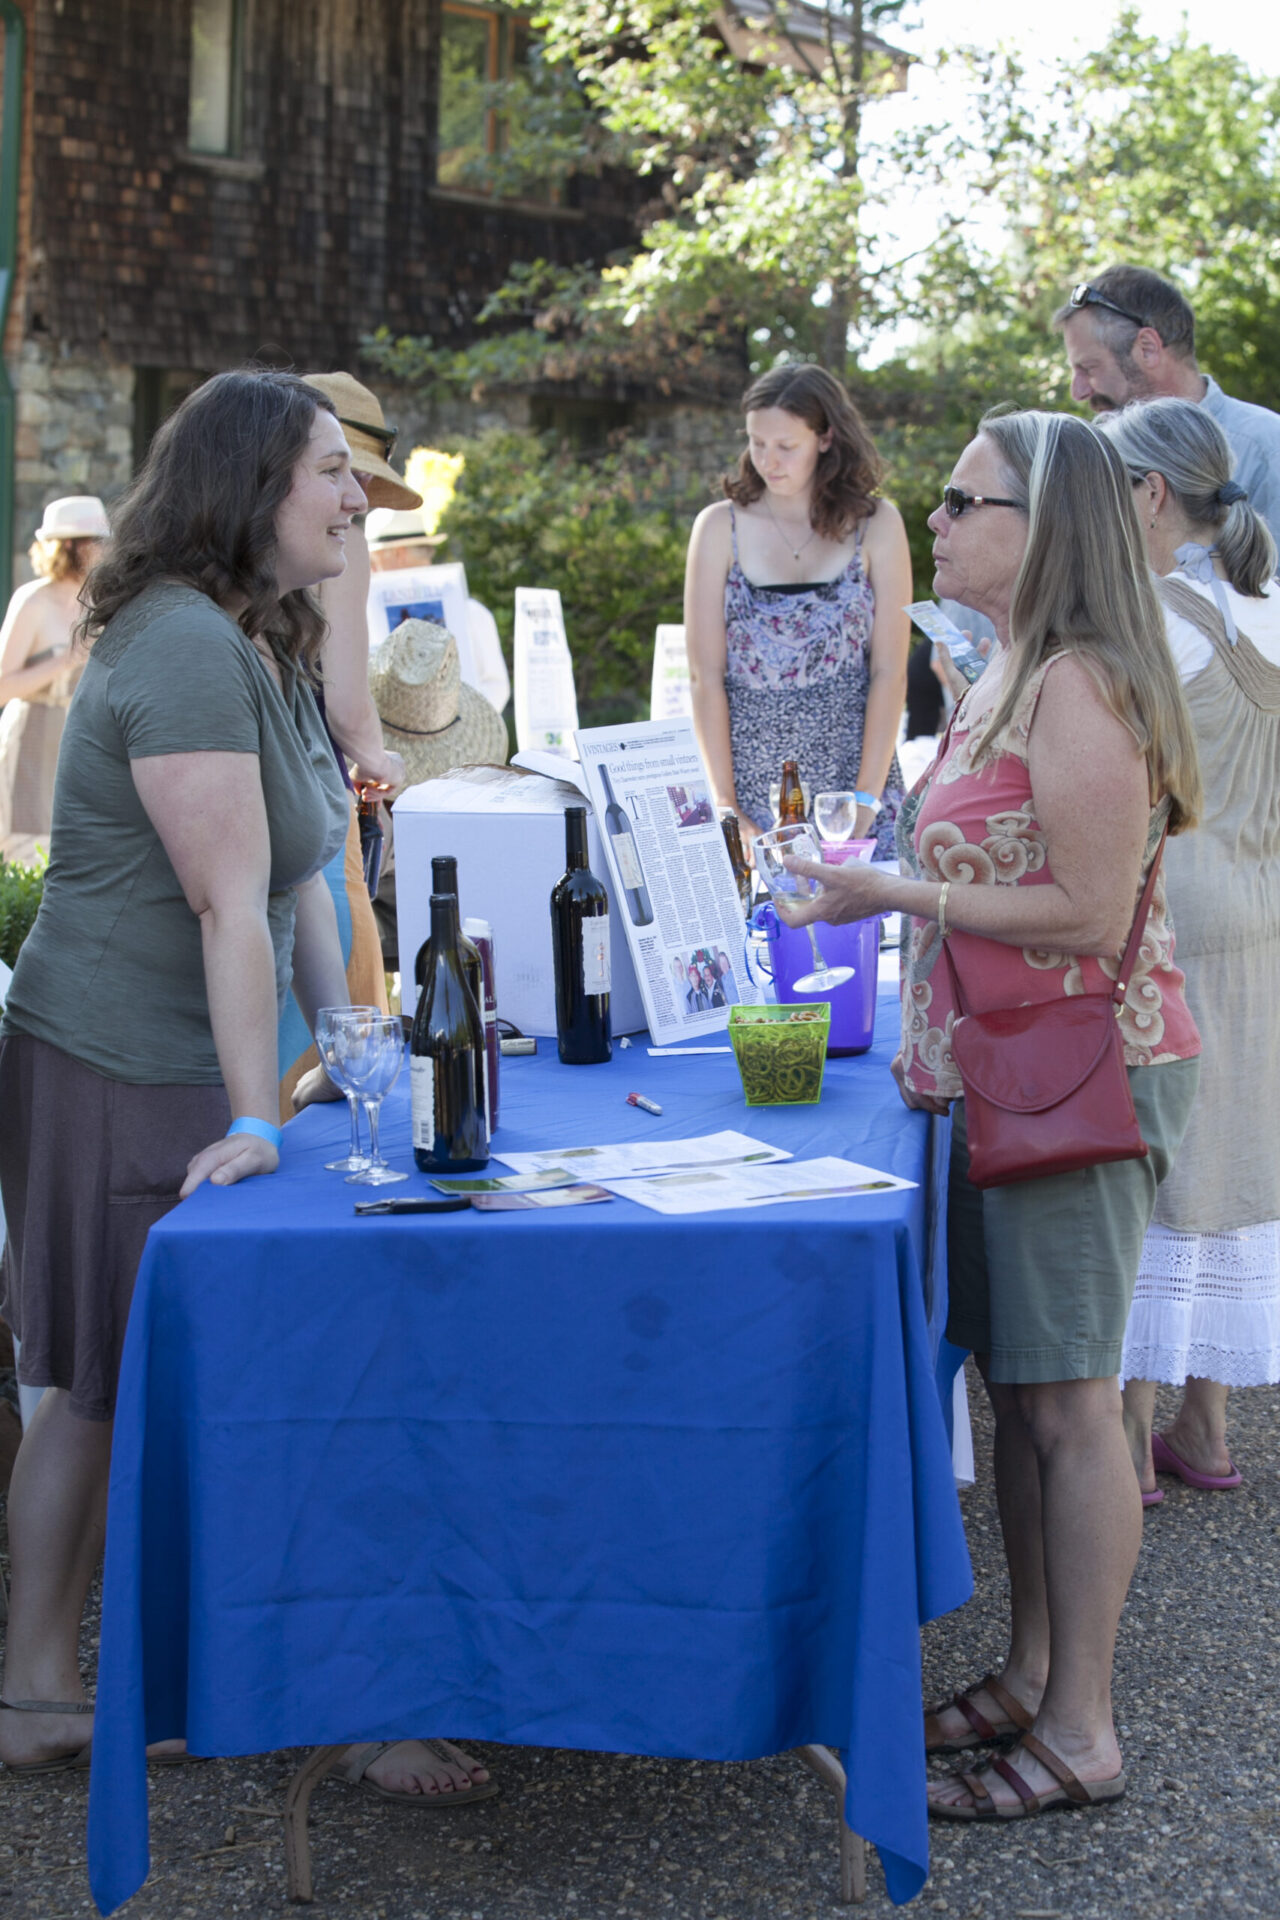 Wineries and breweries from all over the region provided delicious beverages!